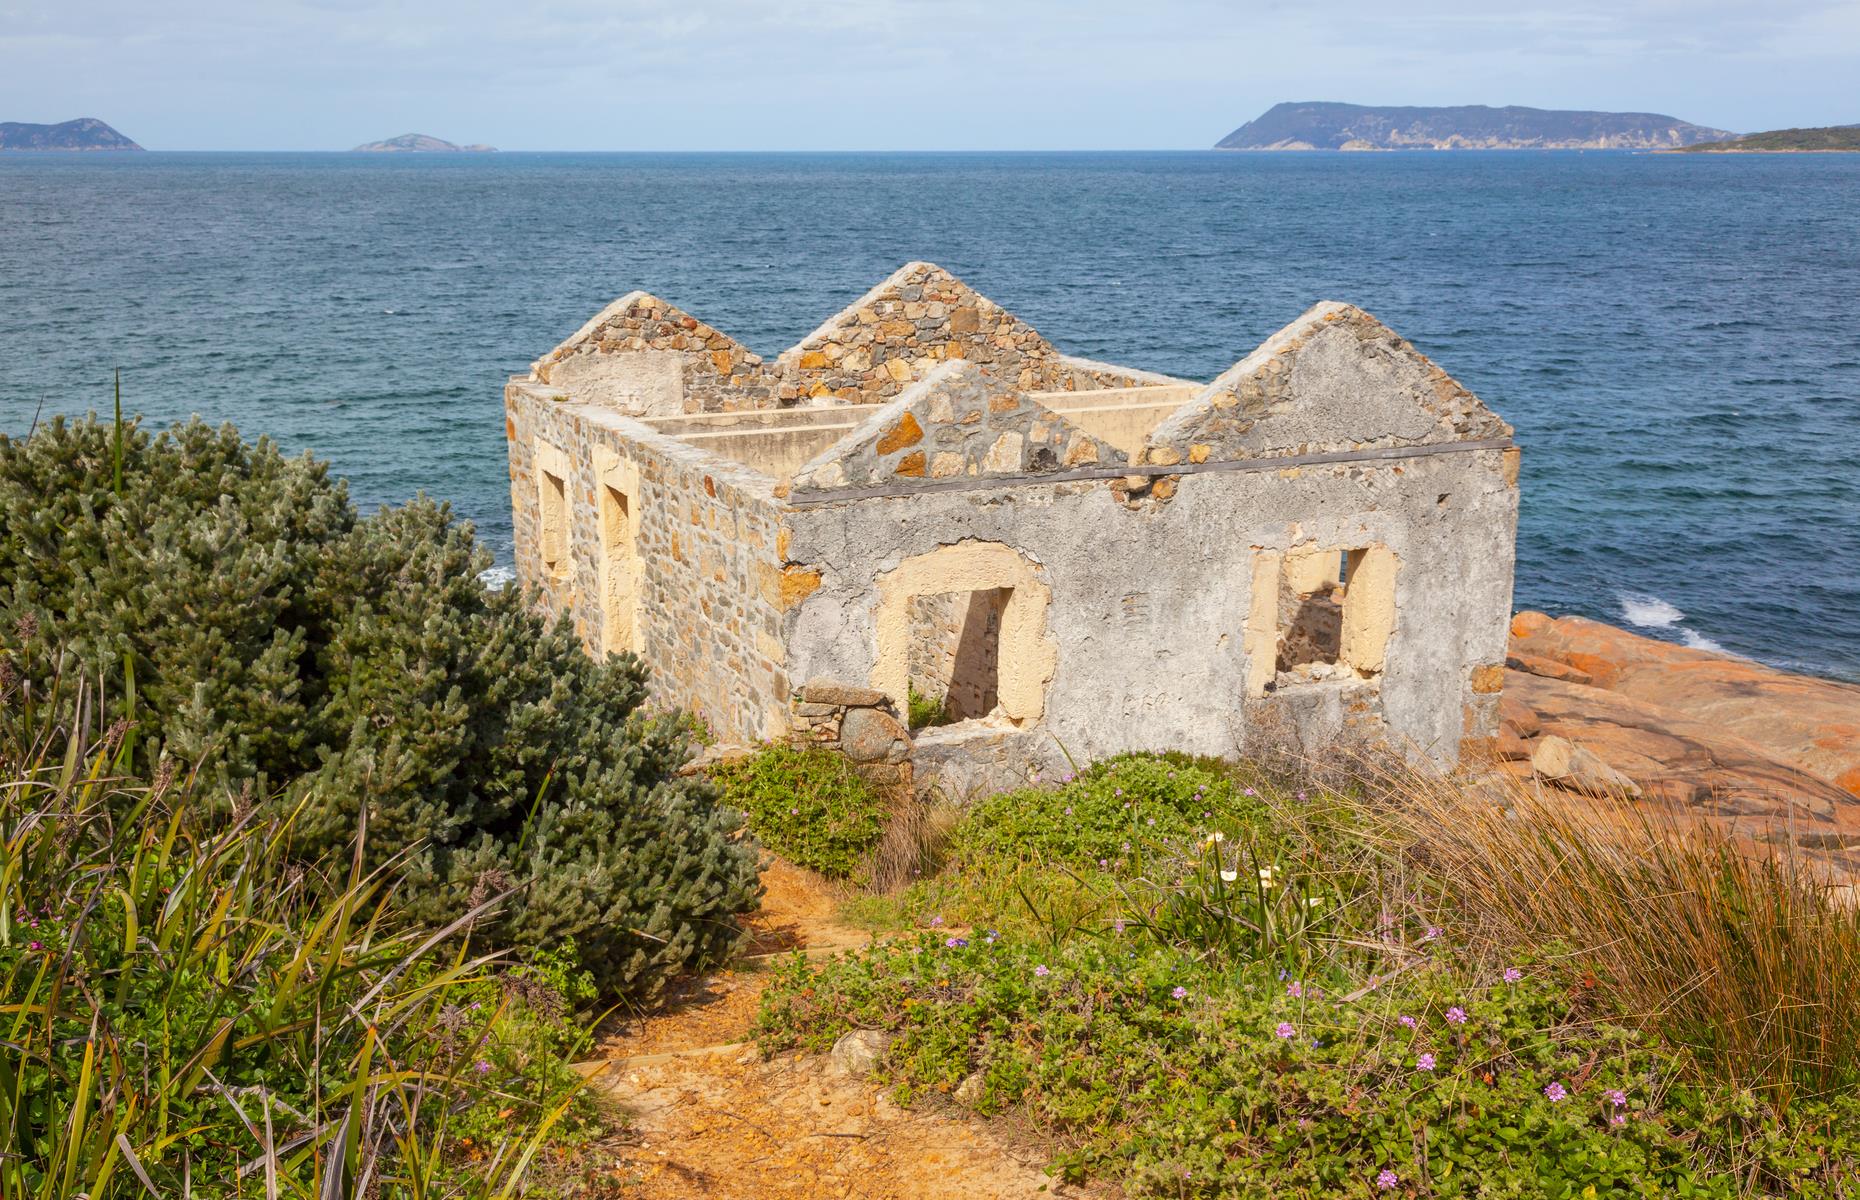 <p>The ruins of the old lighthouse and keeper's house still guard the entrance to Princess Royal Harbour, albeit in a run-down state. Erected under the order of the British government in 1857, the stone lighthouse was the first navigational light for the port of Albany and the second lighthouse ever built on Western Australia's coastline. The light was first turned on in 1858 with William Hill as its inaugural light keeper. It became automatic in 1913, but fell into disrepair with its original wooden light tower now long gone.</p>